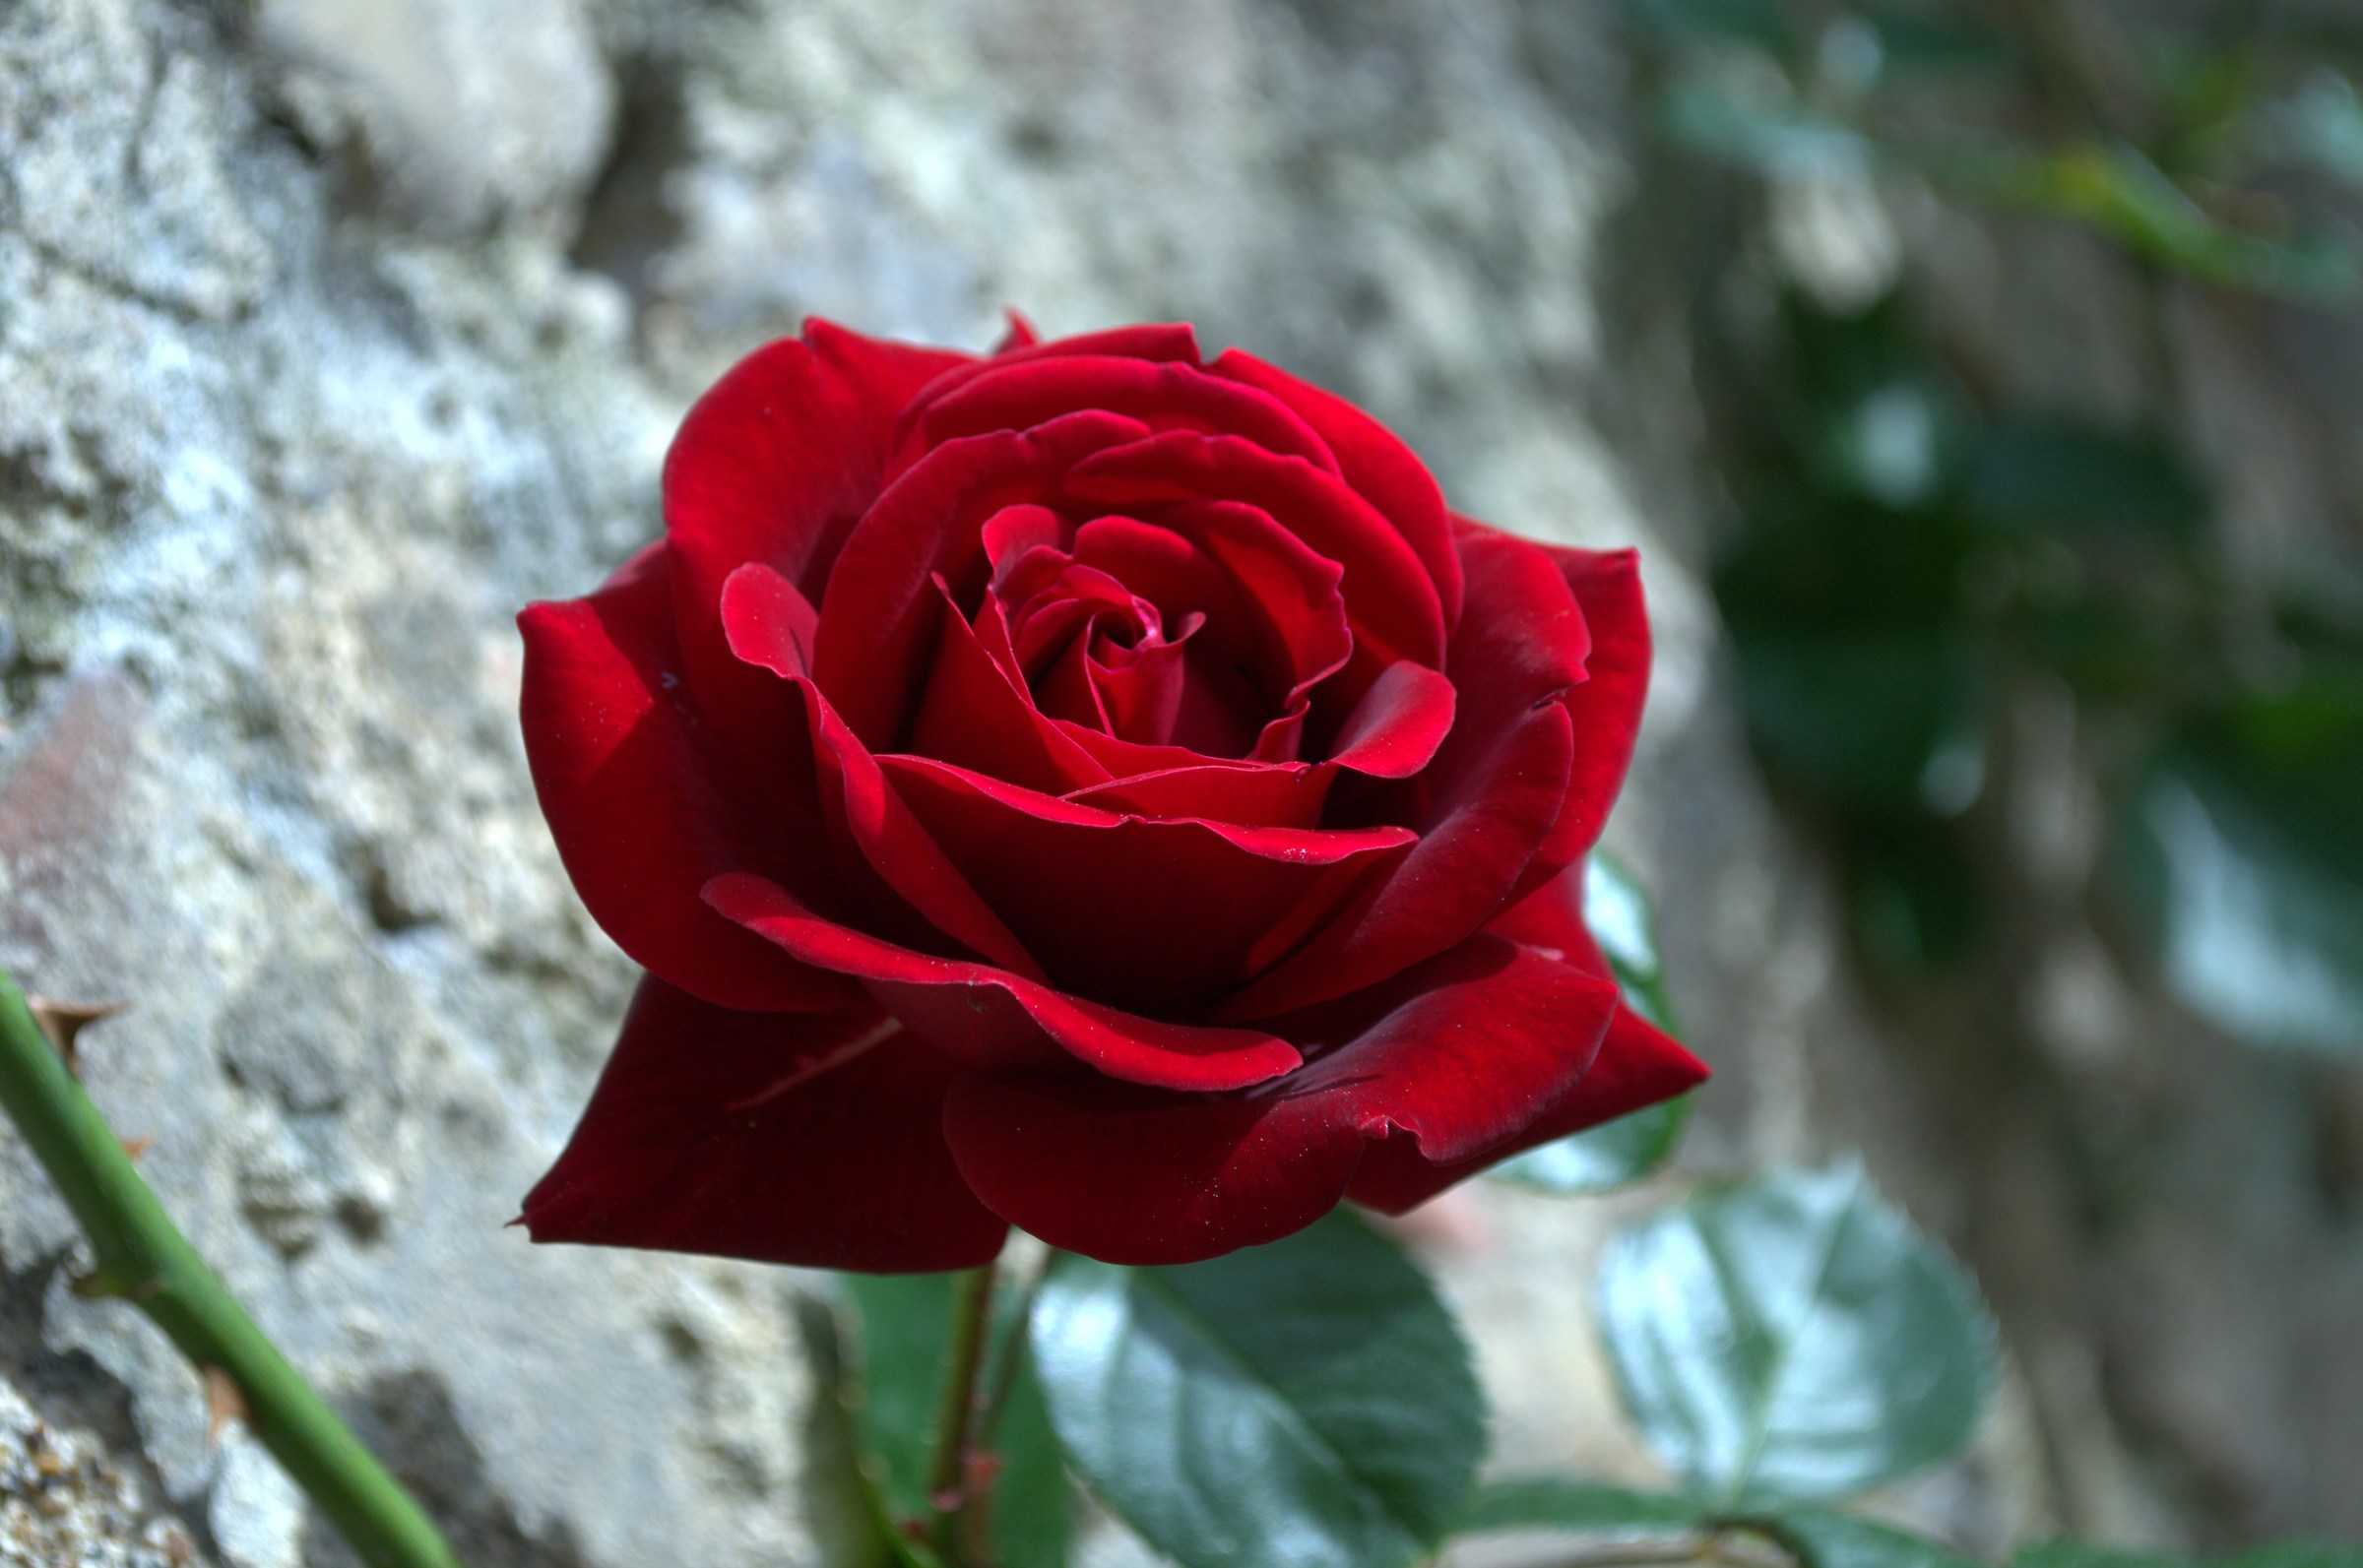 A red rose...